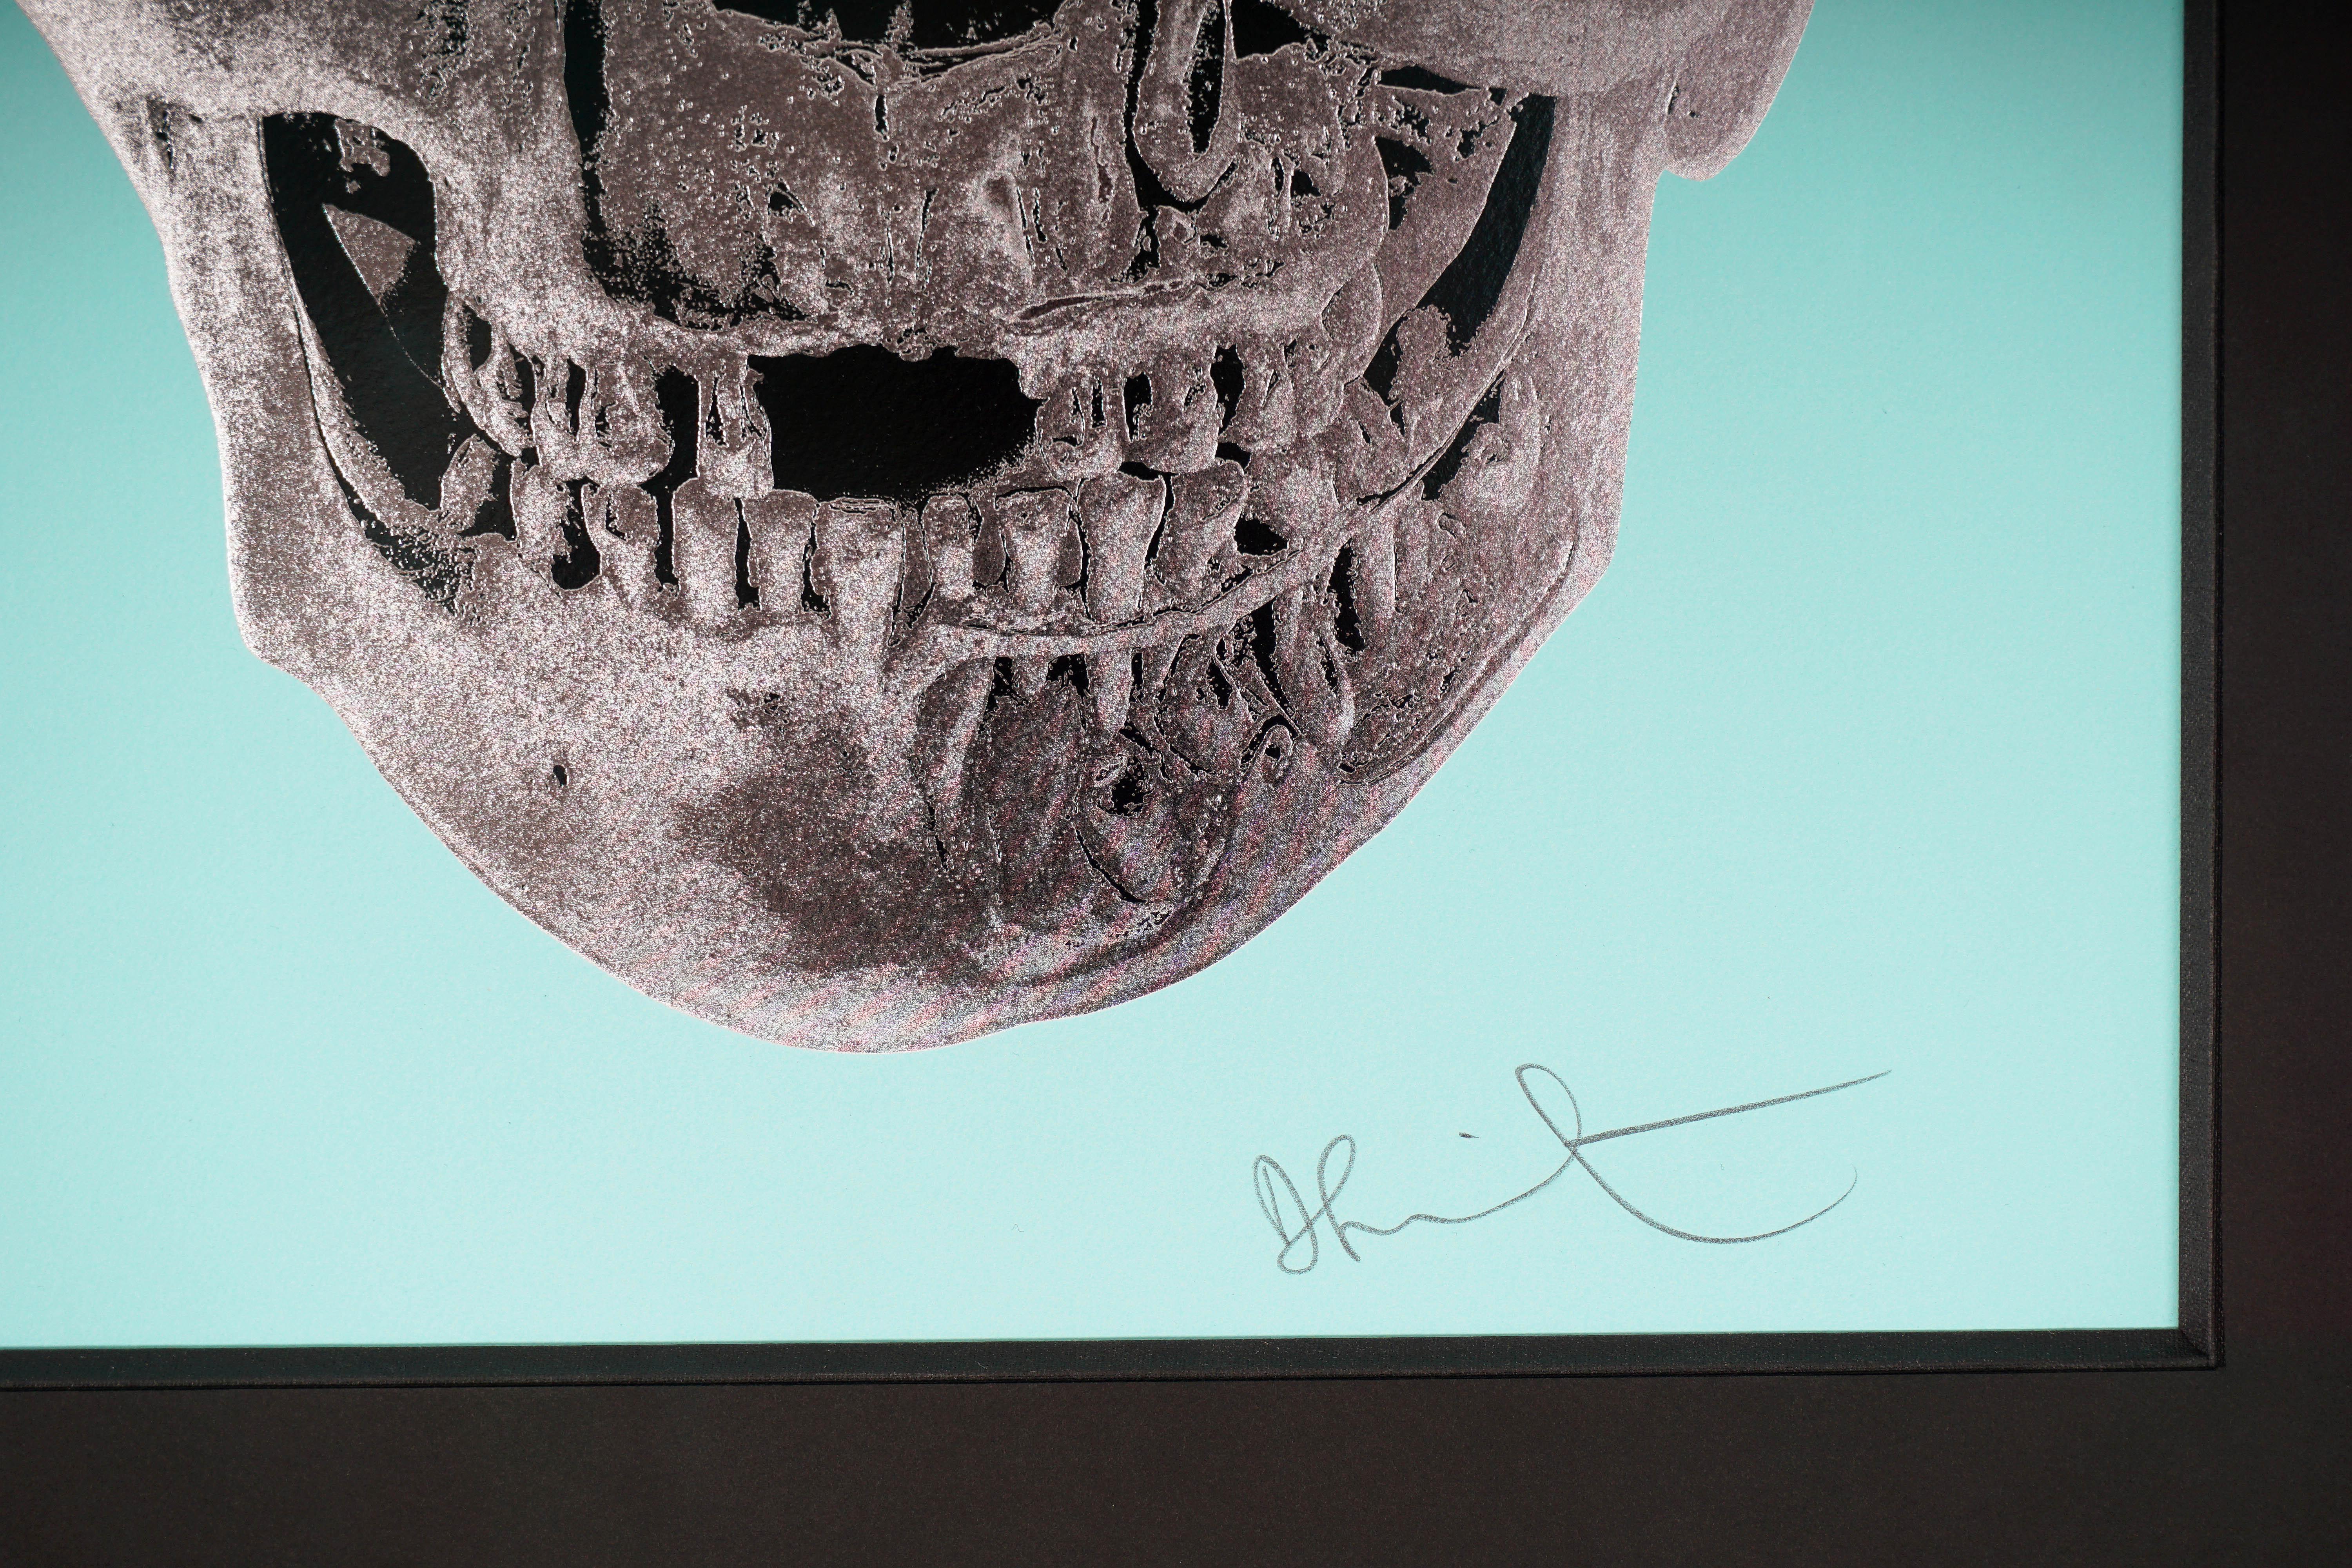 Damien Hirst, Skull, Turquoise/Silver, 2012 1